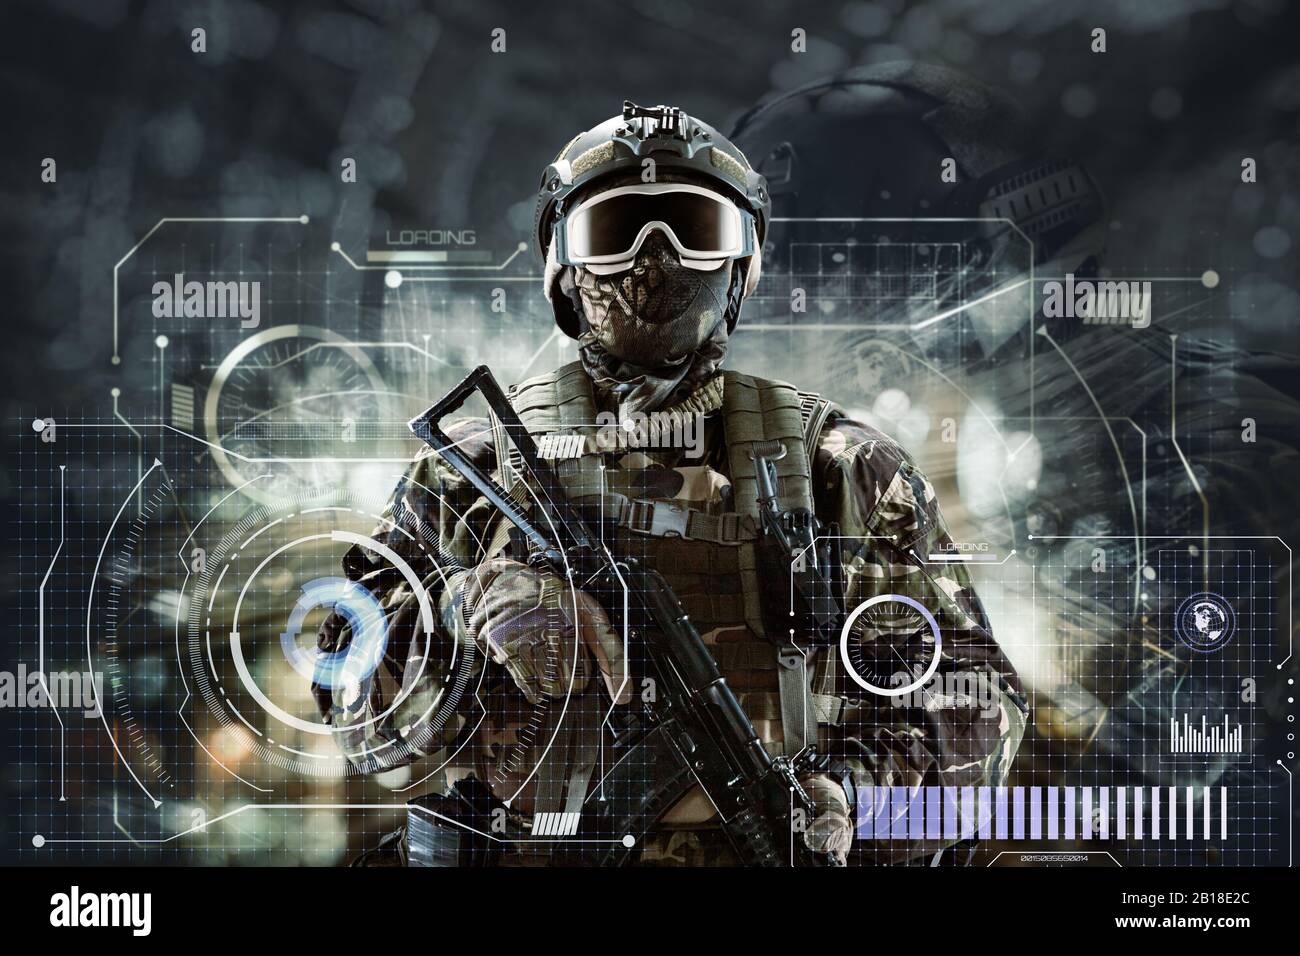 Soldier special forces in glasses with weapons in their hands on a futuristic background.  Military concept of the future. Stock Photo